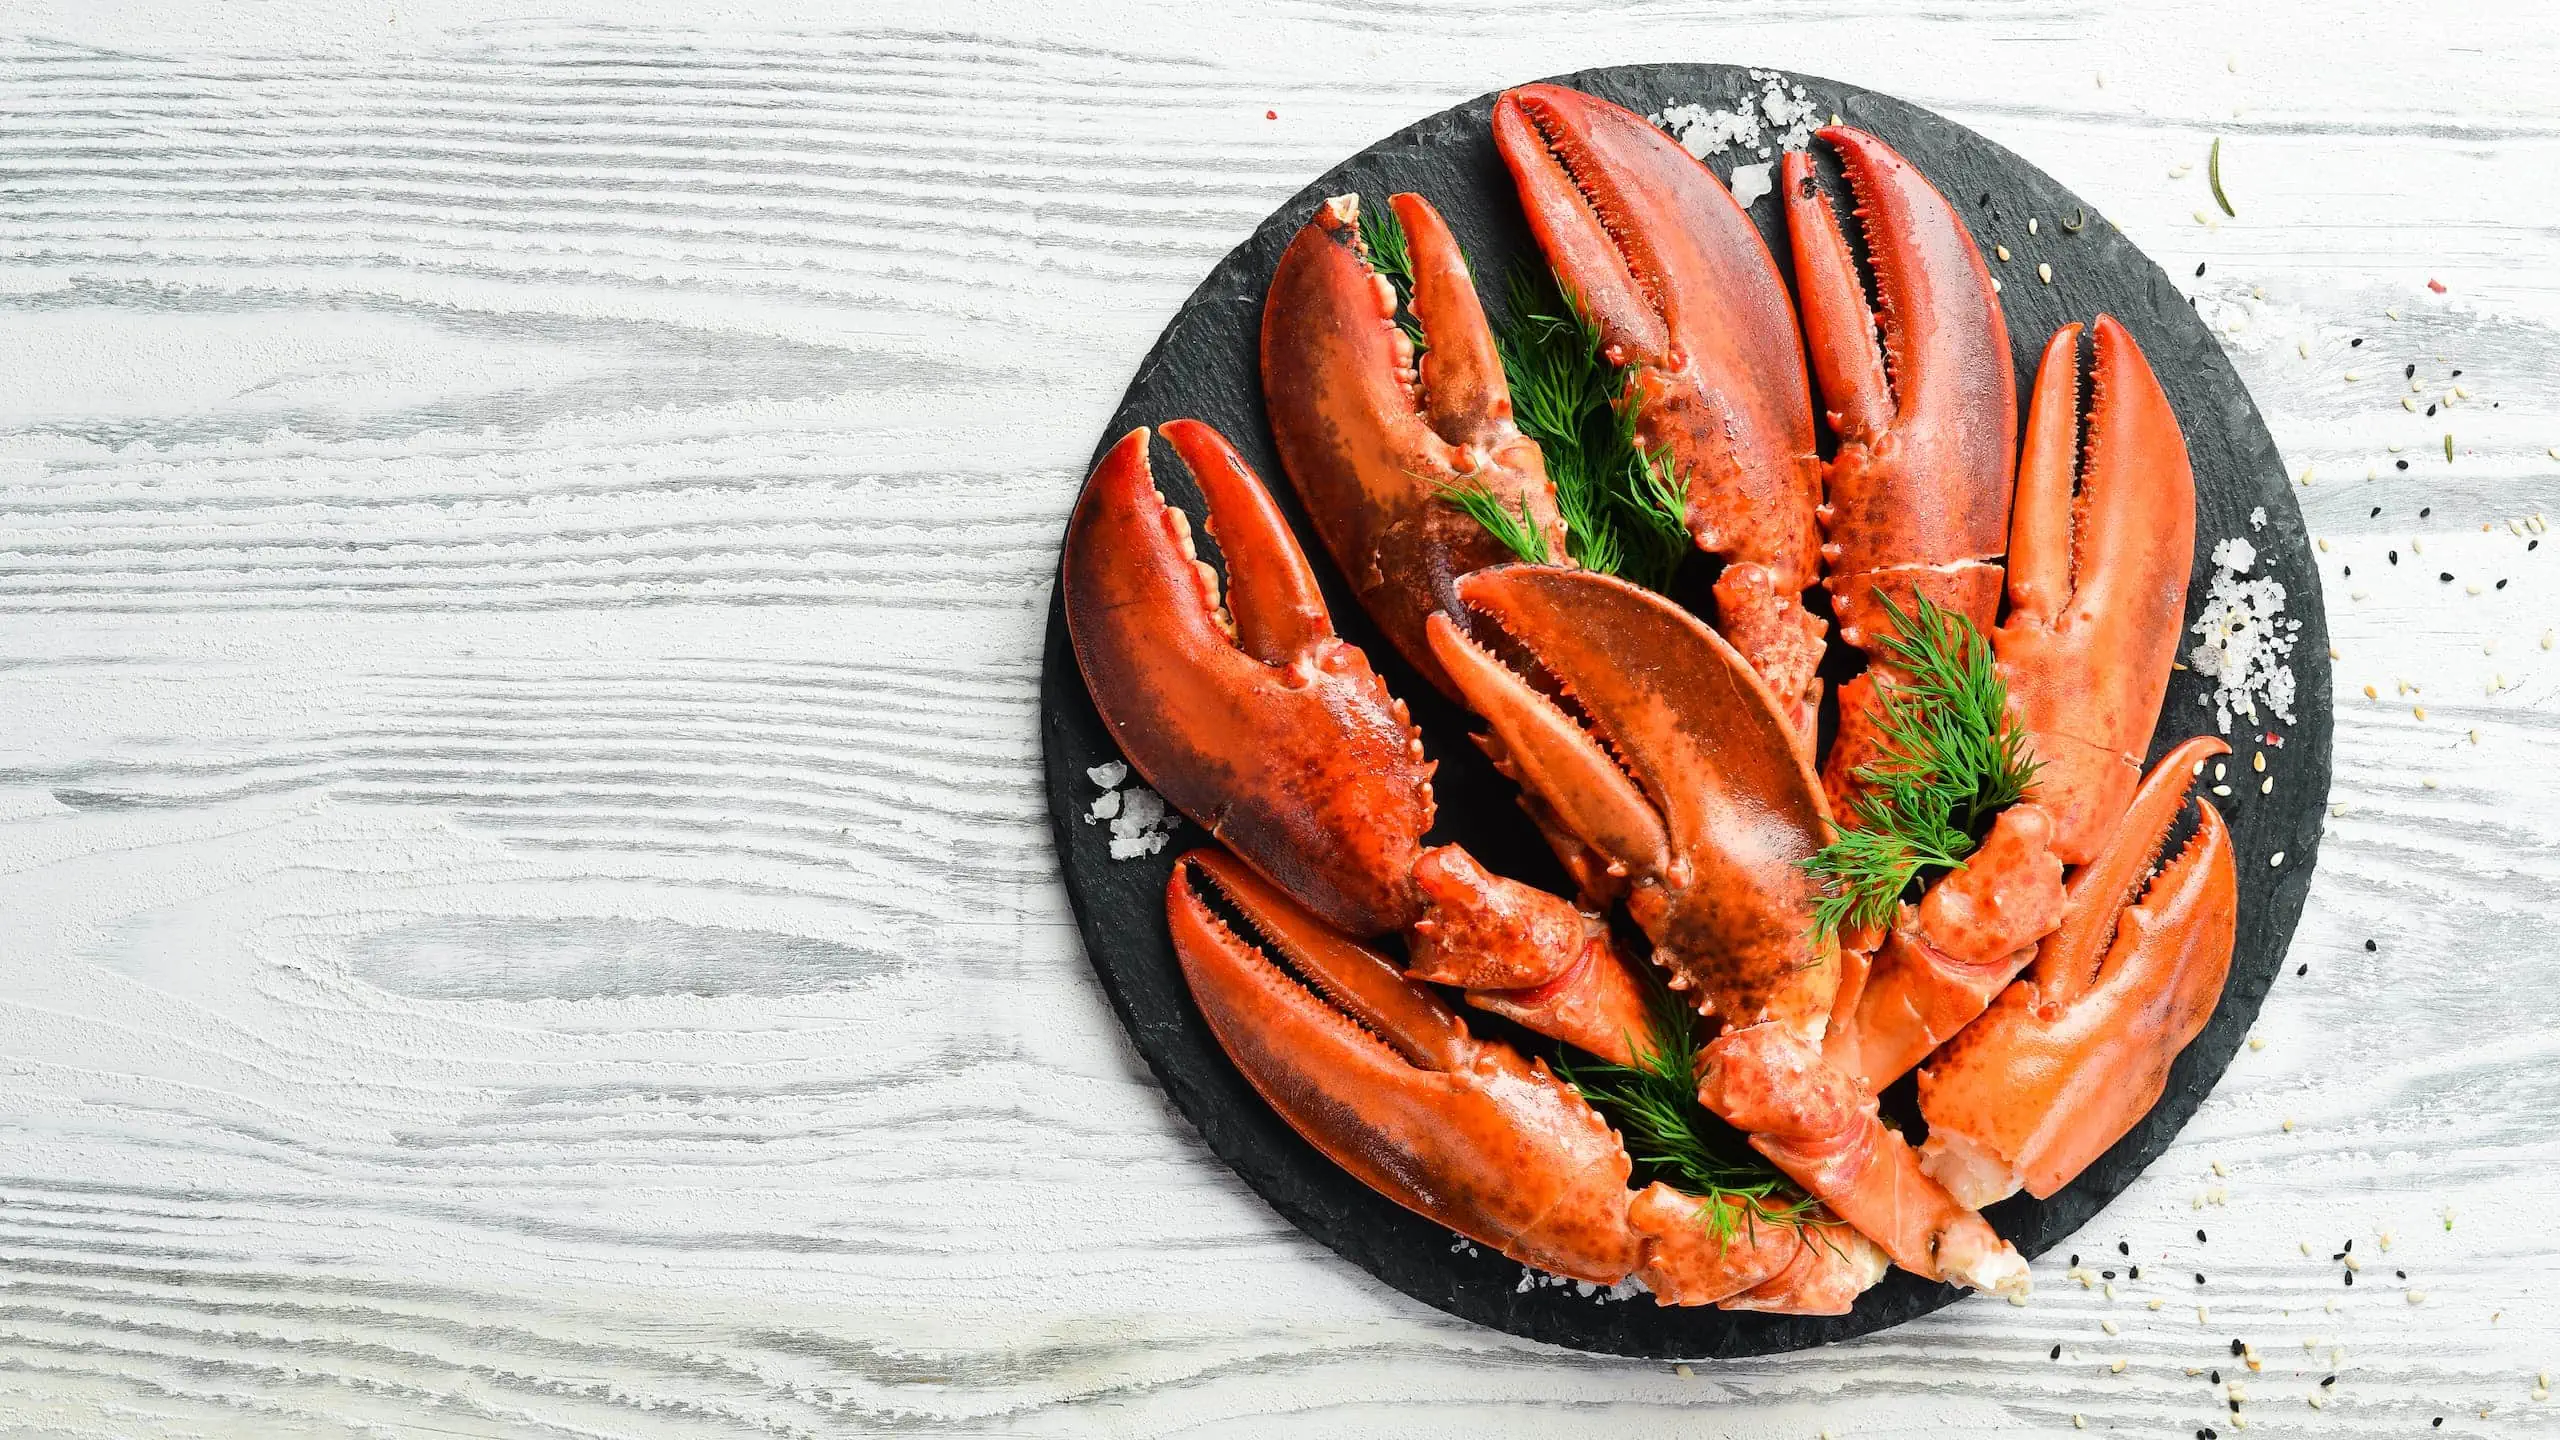 Our version of lobster claws recipe